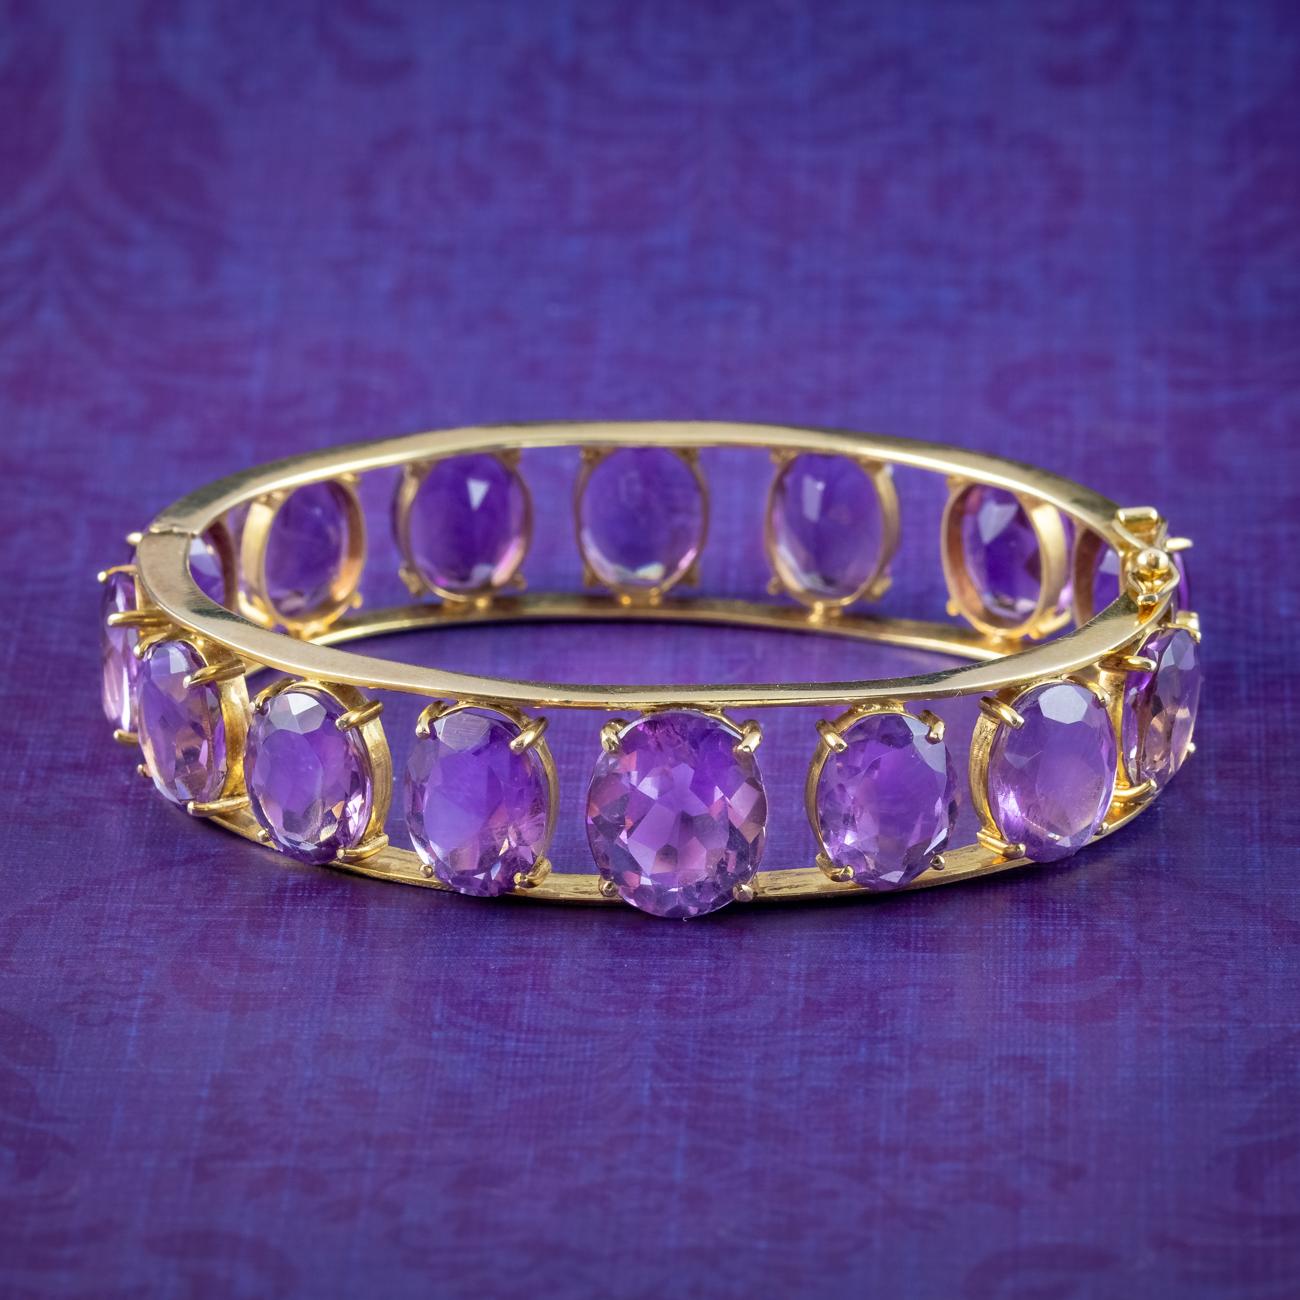 A regal vintage eternity bangle from the late 20th Century adorned with fifteen glorious oval cut amethysts chasing around the entire circumference. They have a deep, purple hue and weigh approx. 4ct each with a larger 6ct stone at the front,